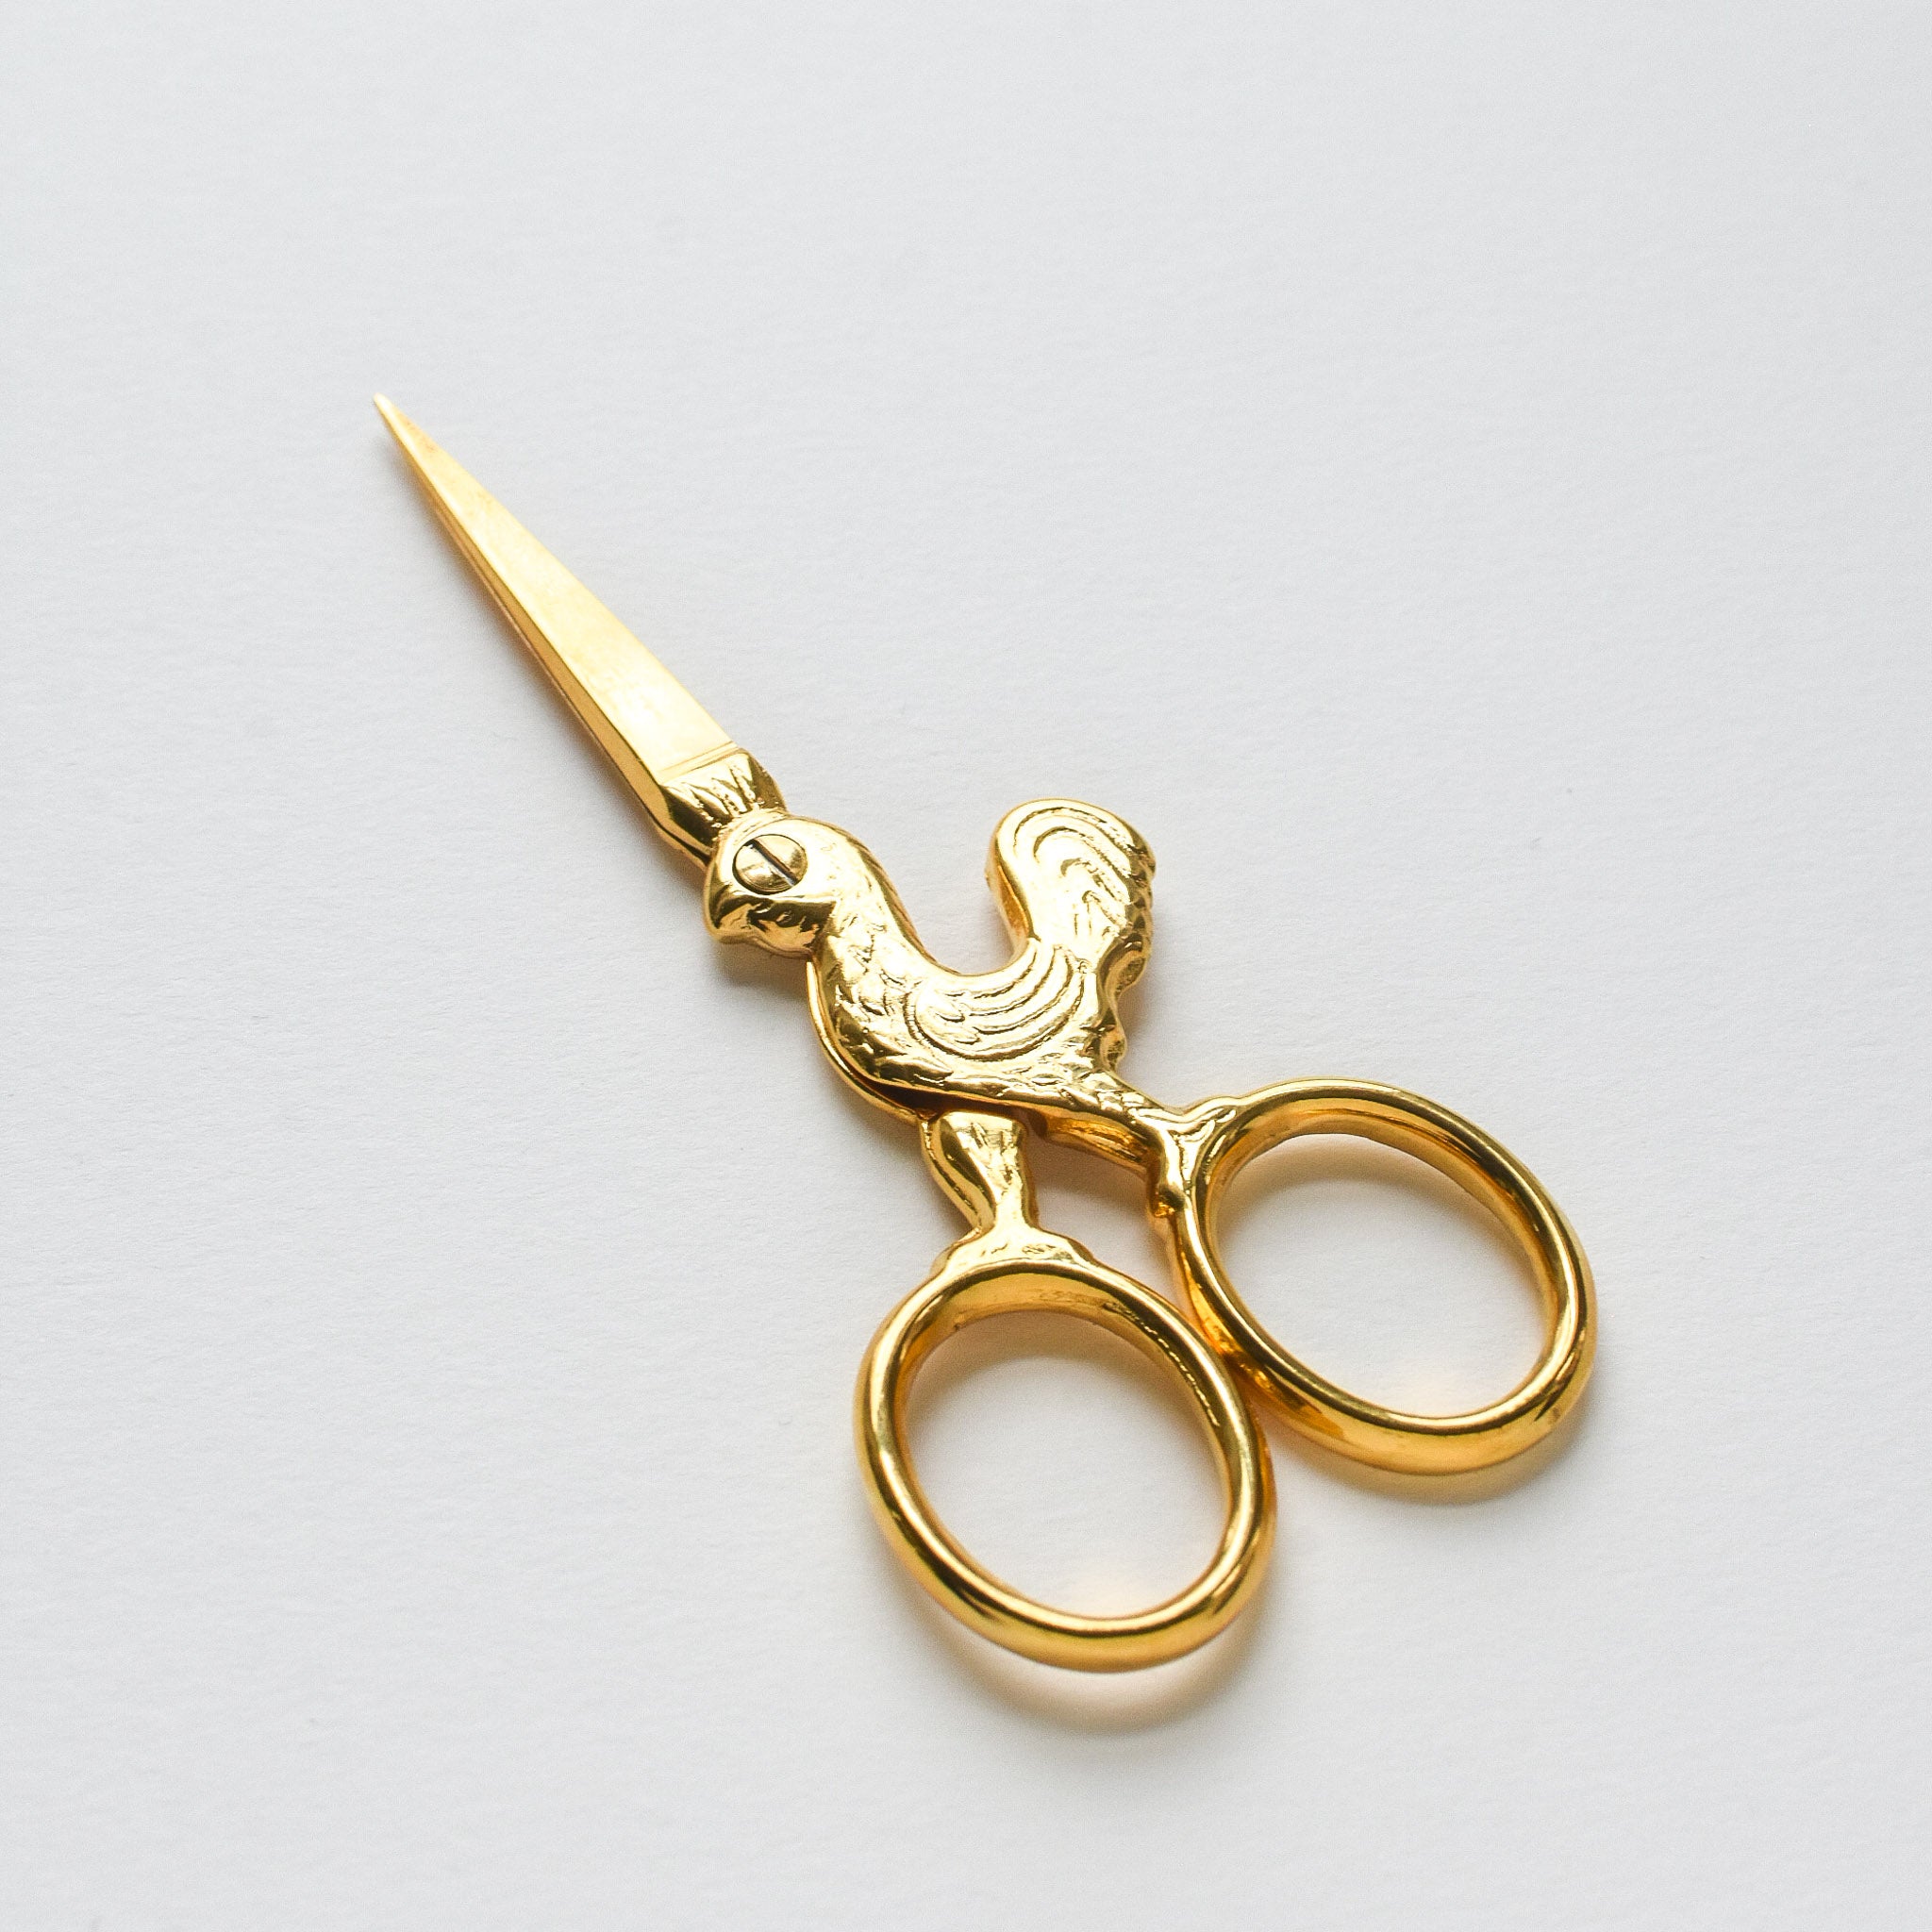 Tiny Red Embroidery Scissors – Brooklyn Haberdashery